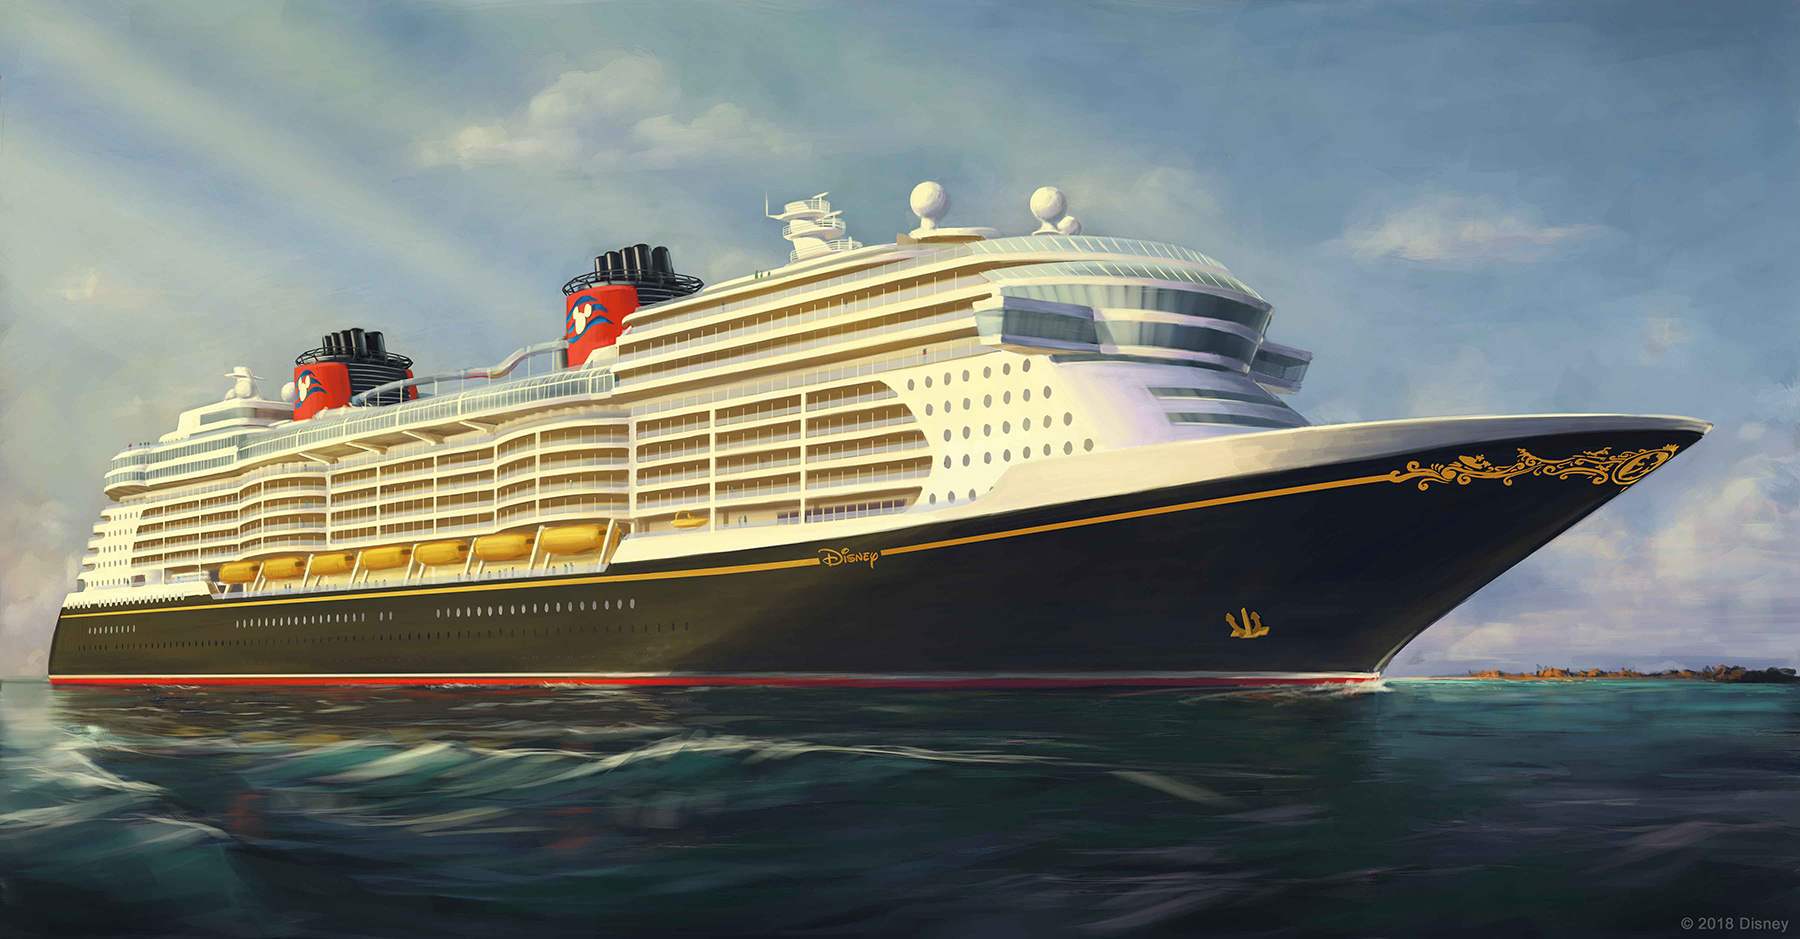 All about Disney Cruise Line's newest cruise ships